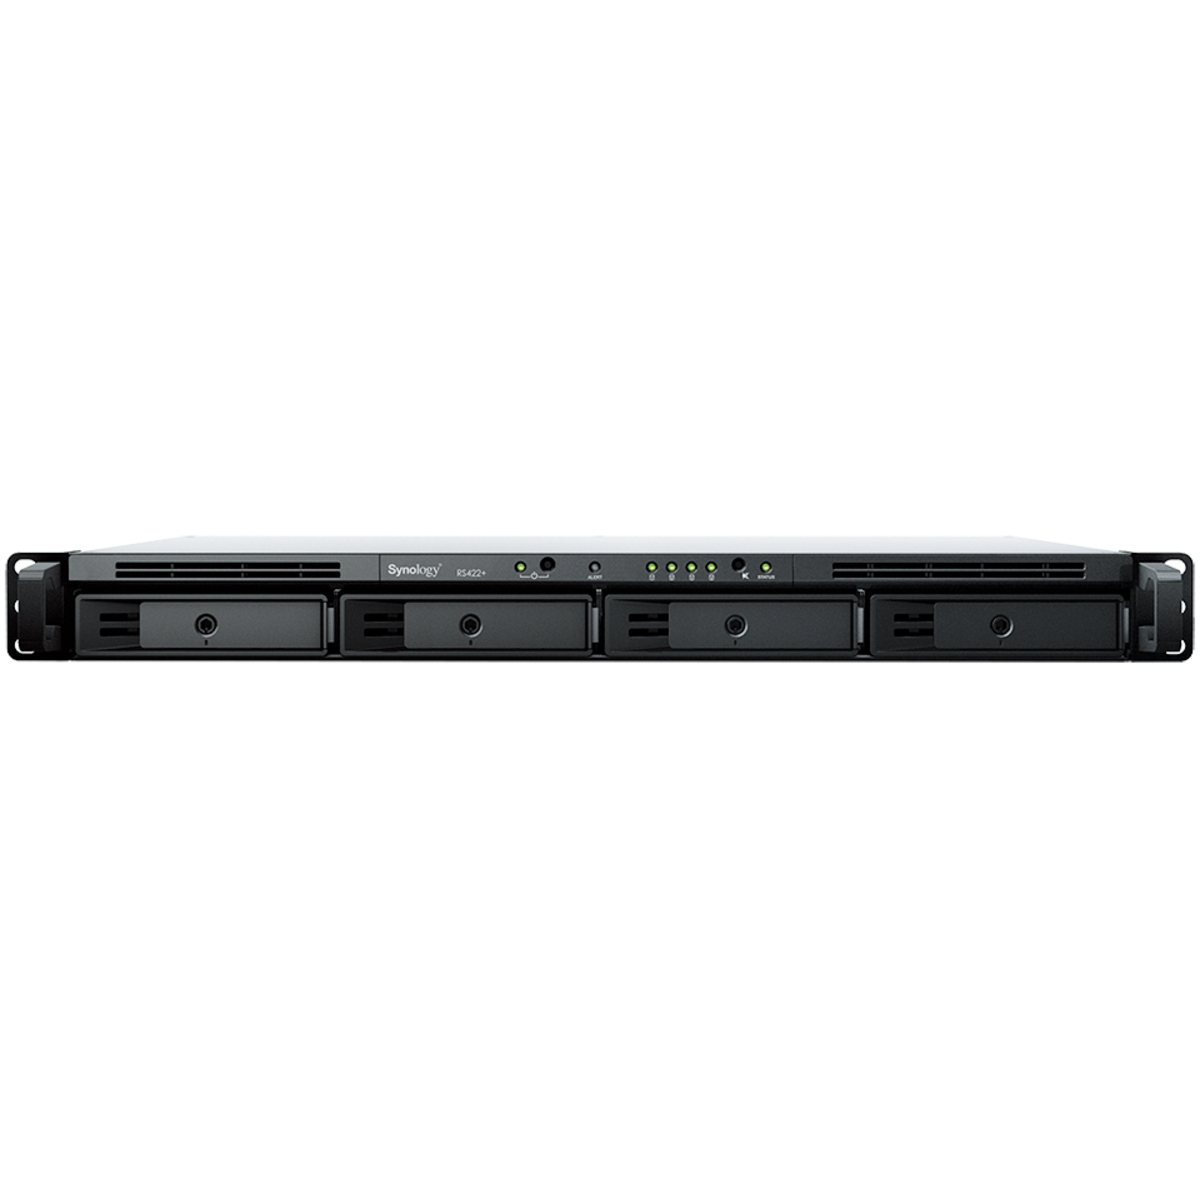 Synology RackStation RS422+ 72tb 4-Bay RackMount Personal / Basic Home / Small Office NAS - Network Attached Storage Device 3x24tb Seagate IronWolf Pro ST24000NT002 3.5 7200rpm SATA 6Gb/s HDD NAS Class Drives Installed - Burn-In Tested RackStation RS422+